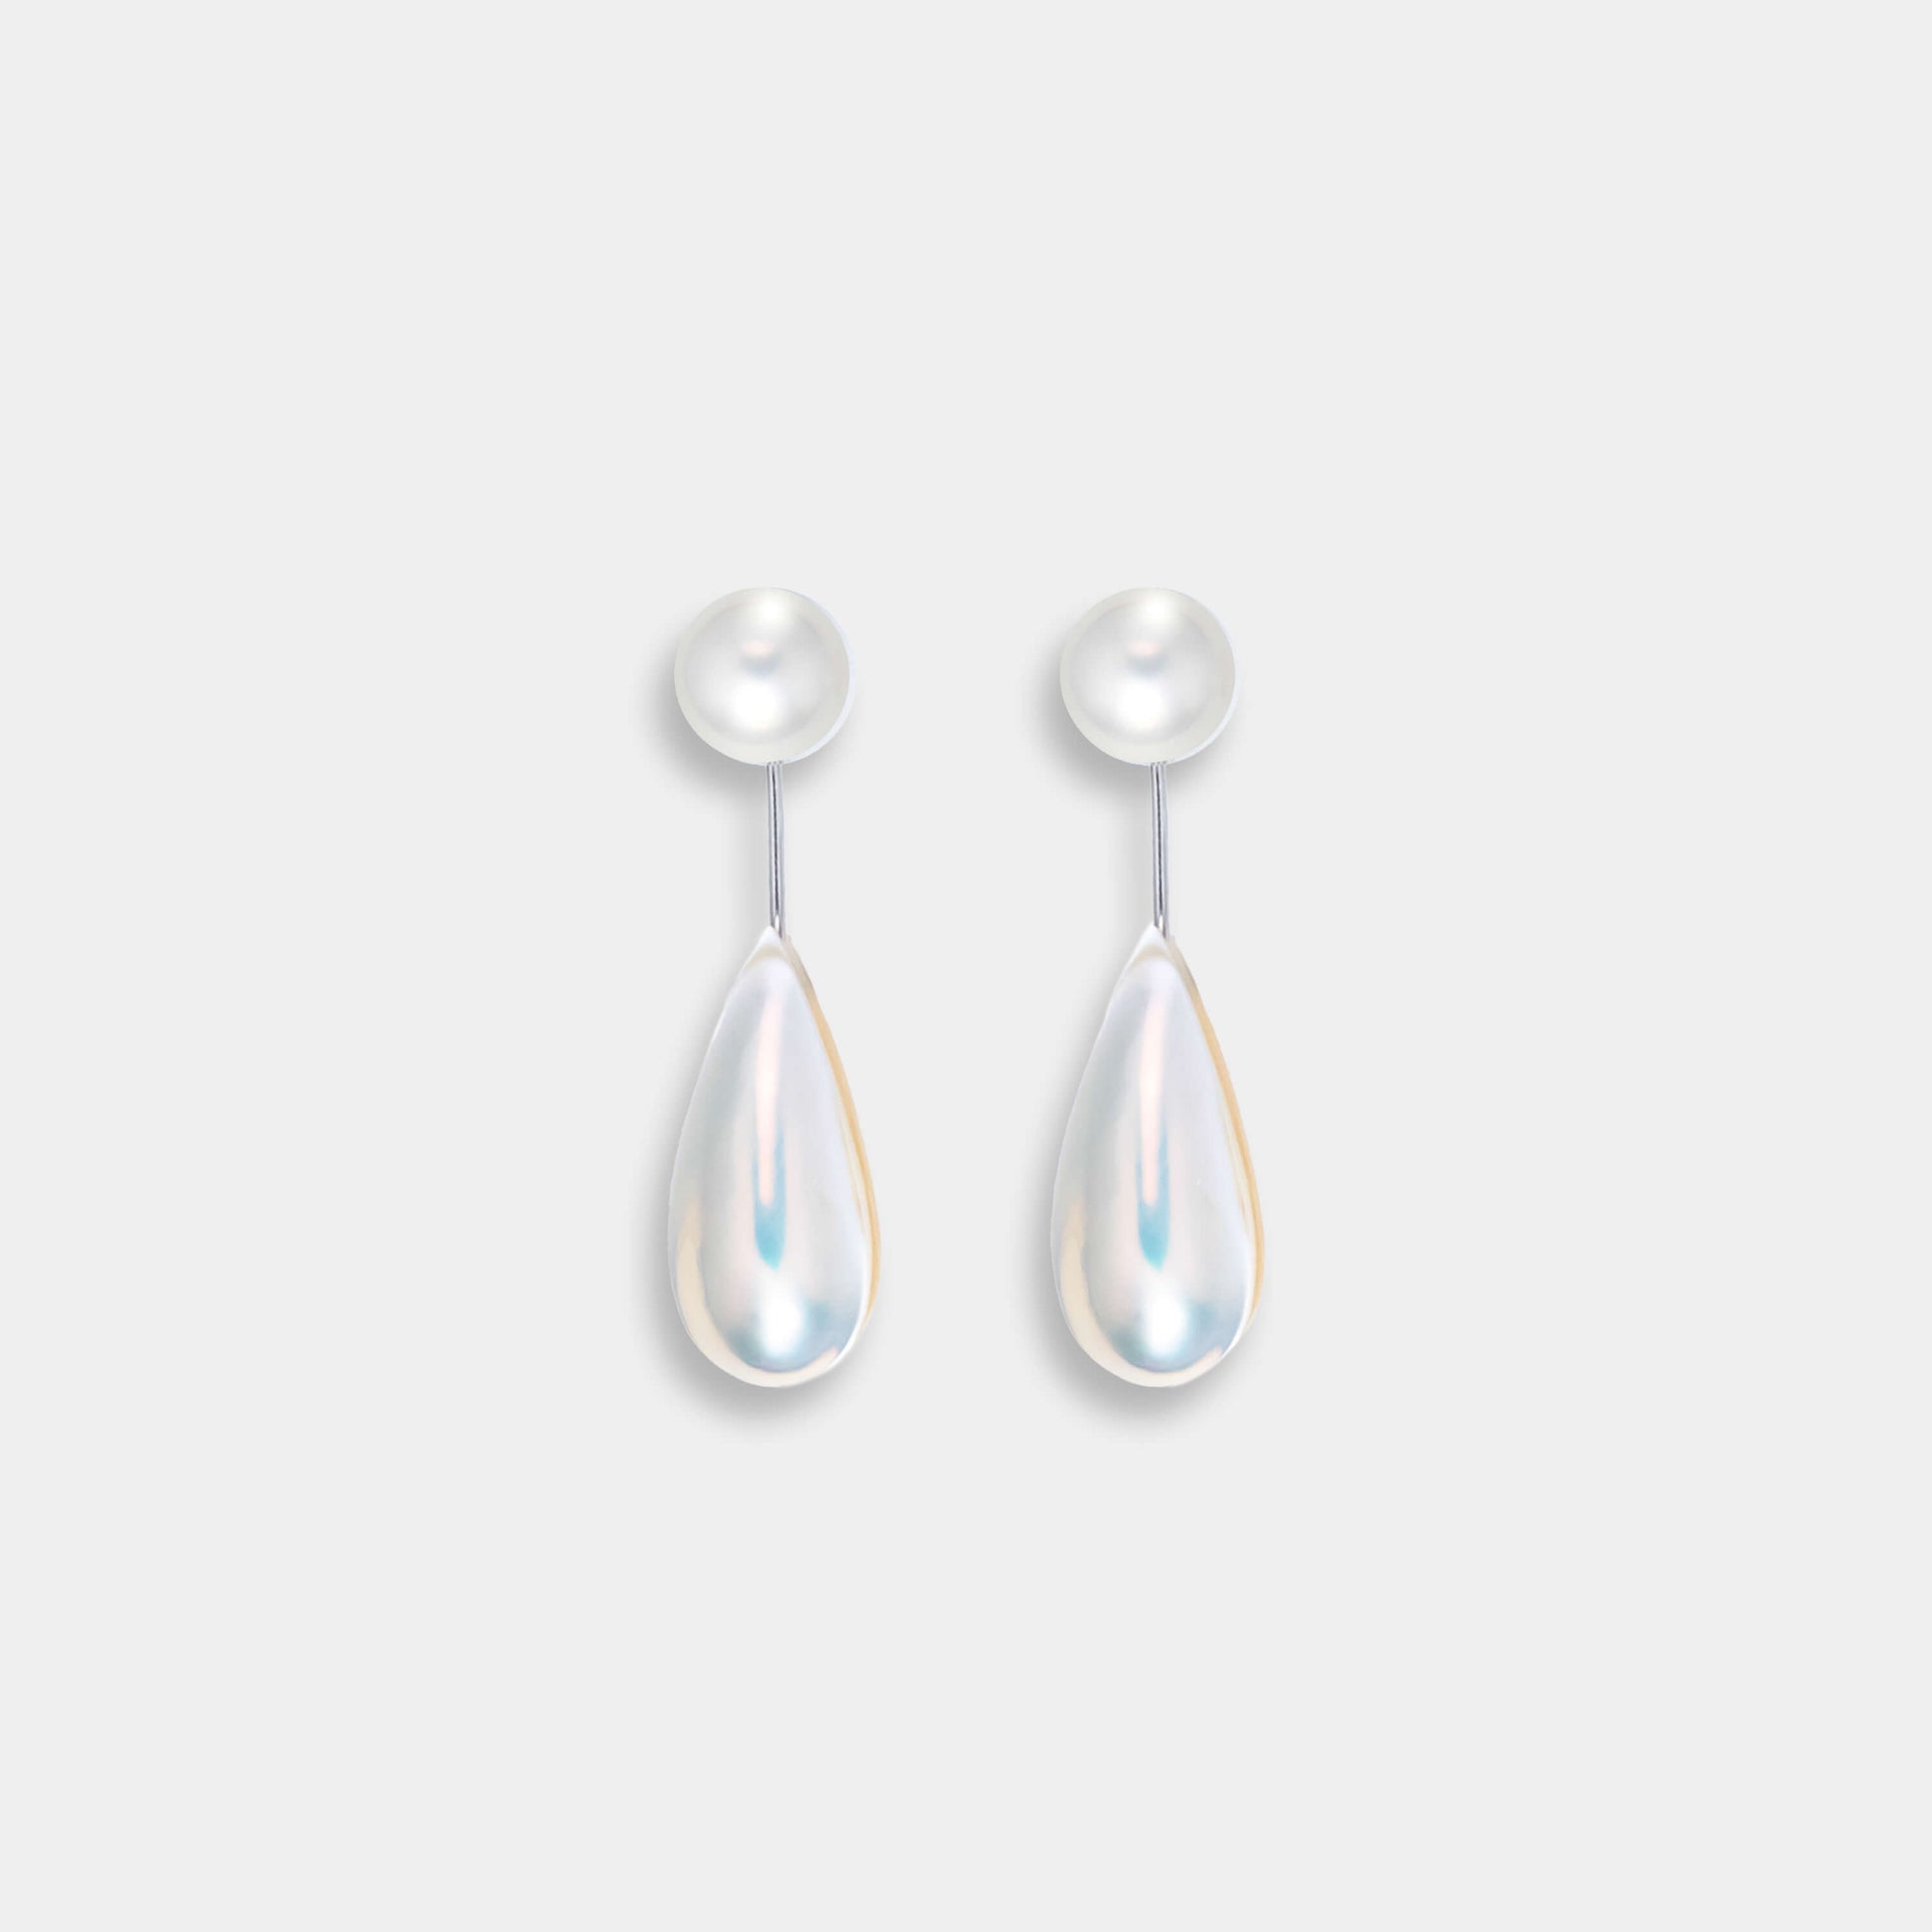 Enhance your look with elegant white pearls on Drop Mabe Pearl Piercing earrings.